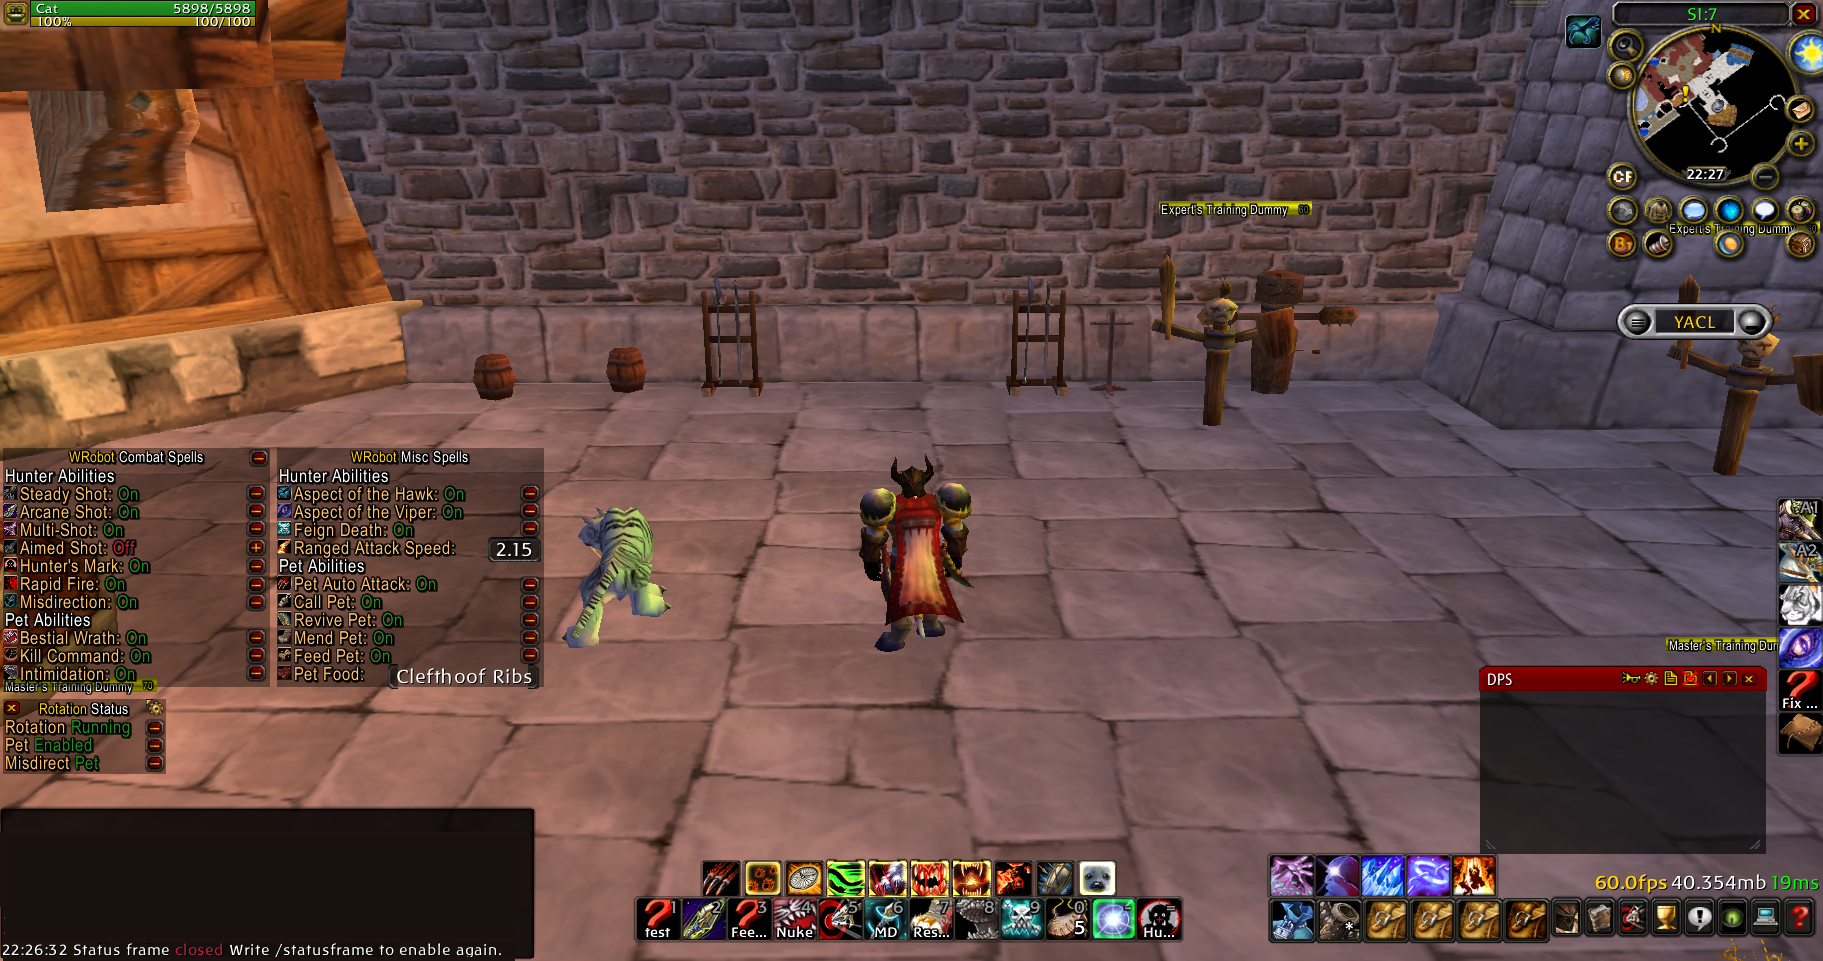 Demo Pve Beastmaster Hunter Tbc 2 4 3 By Ordush Fight Classes Tbc Wrobot